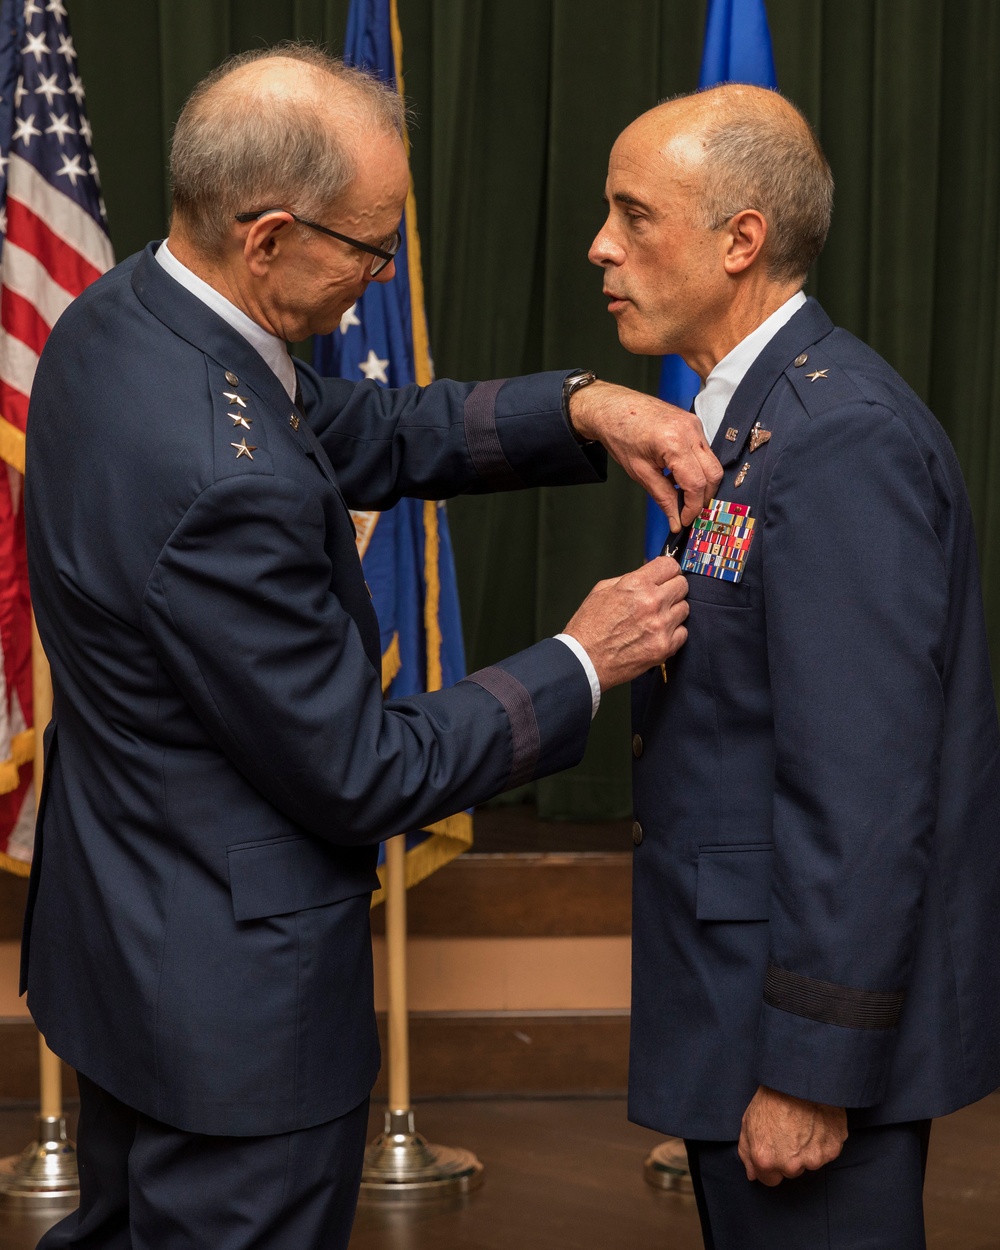 Air Force Medical Operations Agency Change of Command